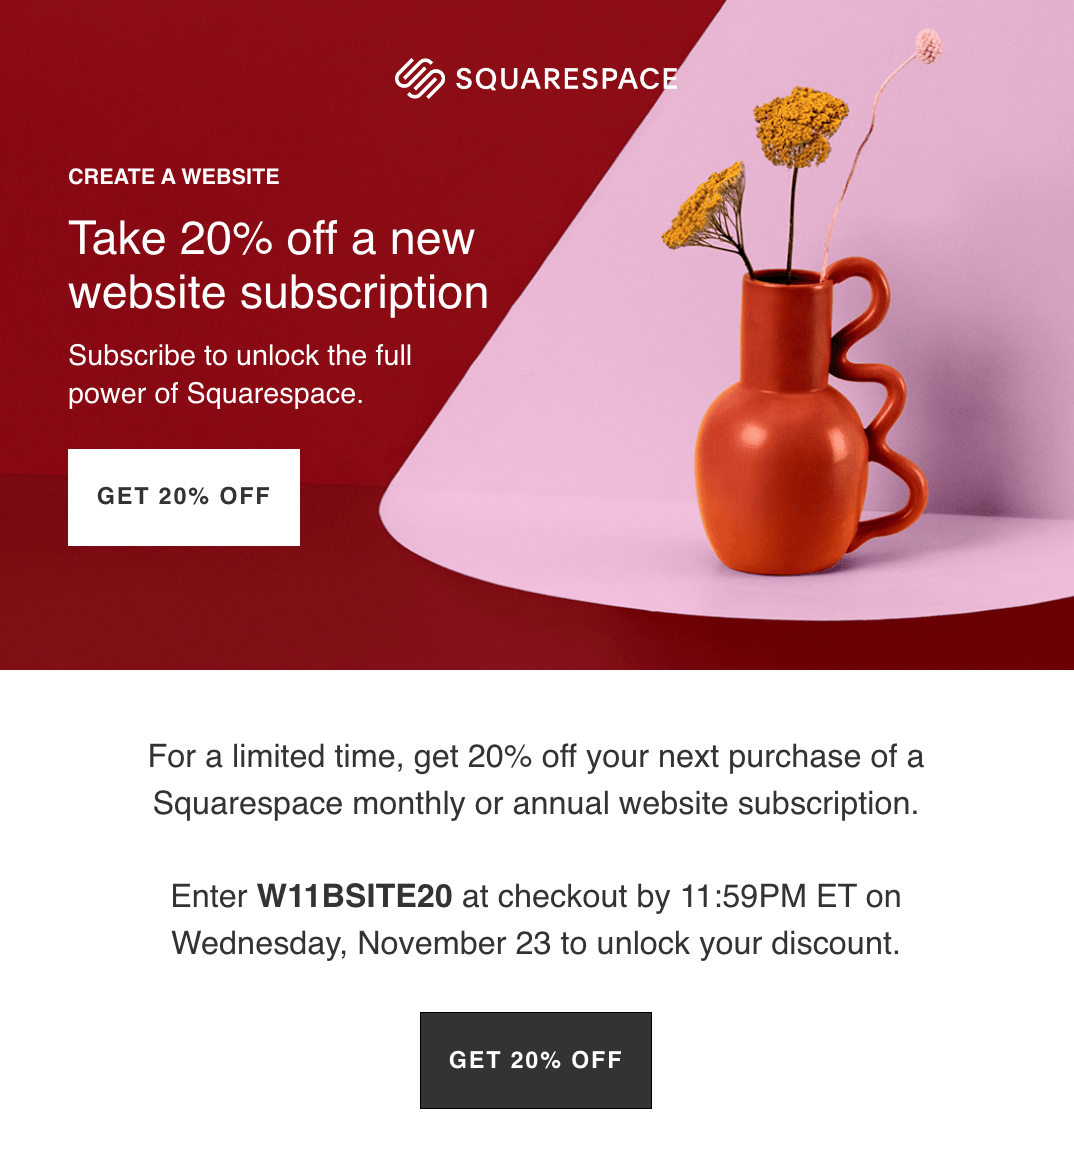 B2C SaaS Email Marketing: Screenshot of Squarespace's email for their discount